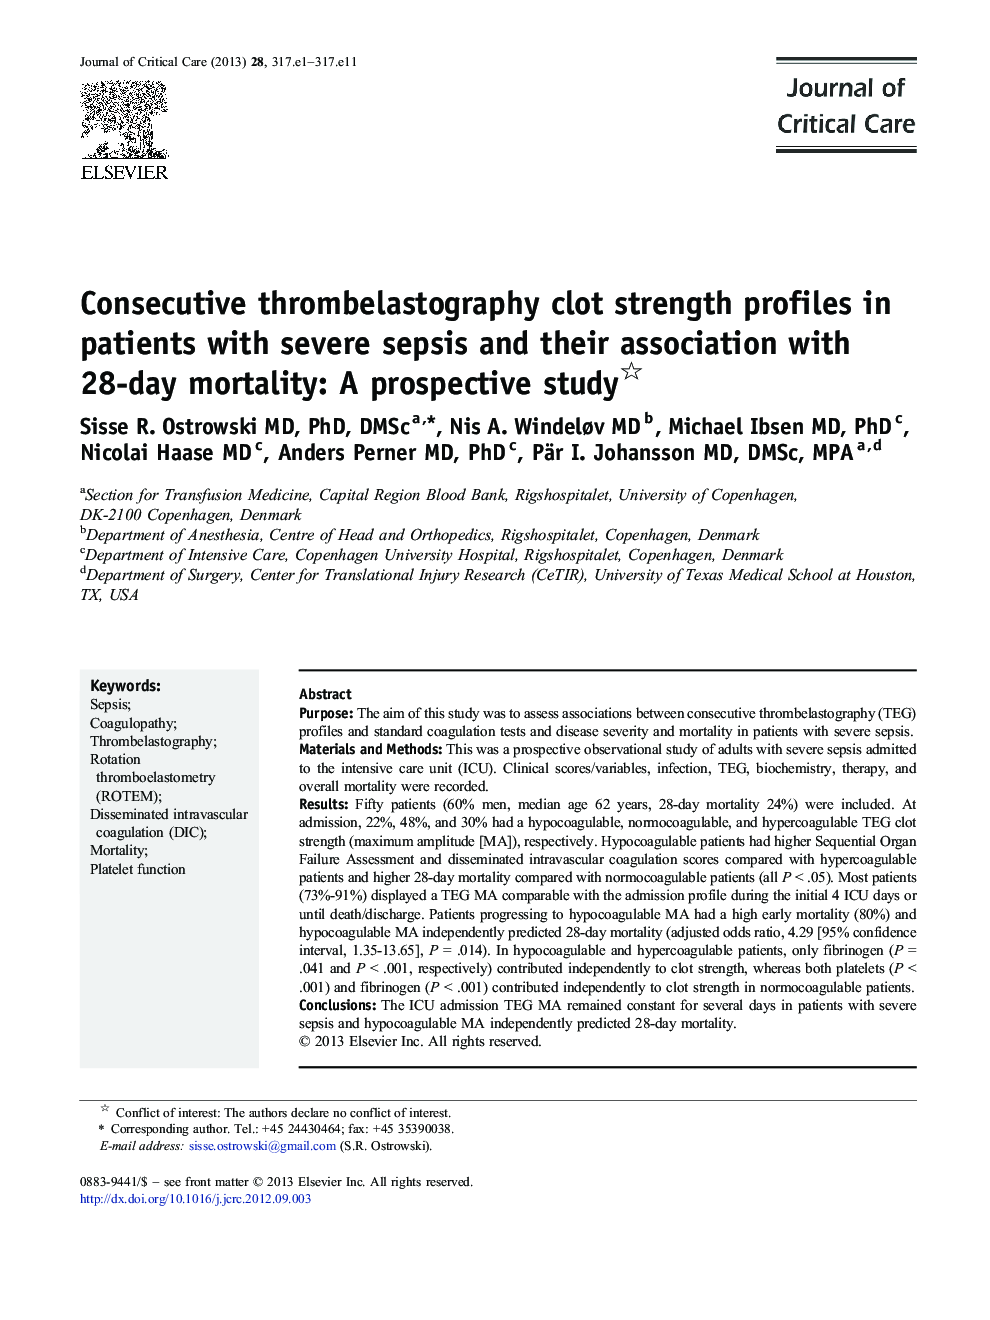 Consecutive thrombelastography clot strength profiles in patients with severe sepsis and their association with 28-day mortality: A prospective study